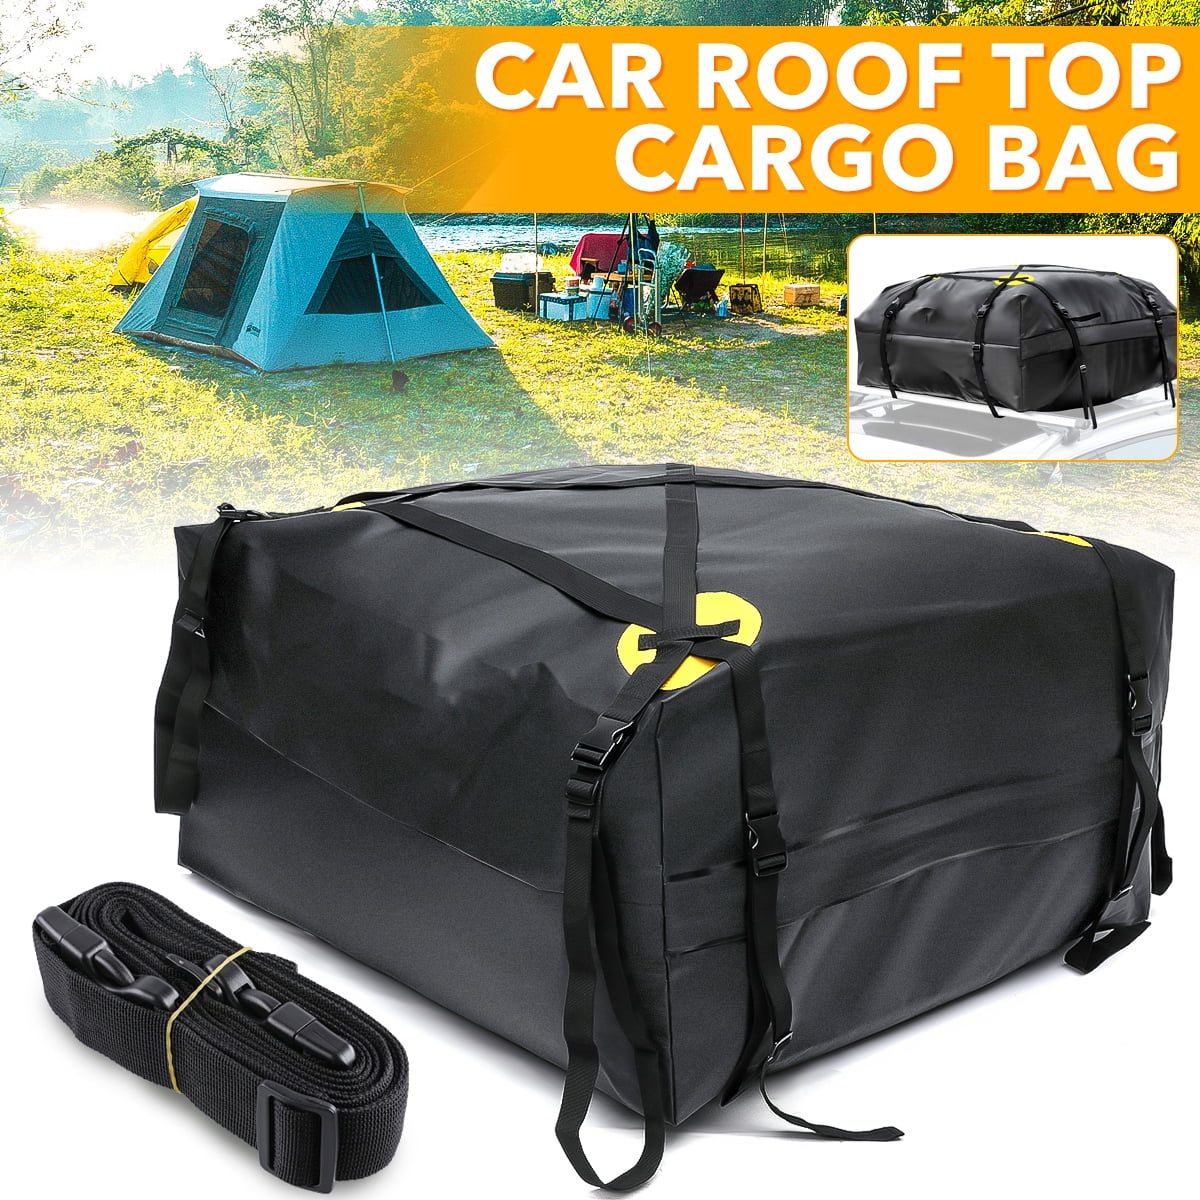 for Cars with or Without Racks 100% Waterproof & Coated Zippers 25 Cubic ft Protective Mat TOOLGUARDS Car Top Carrier Roof Bag 